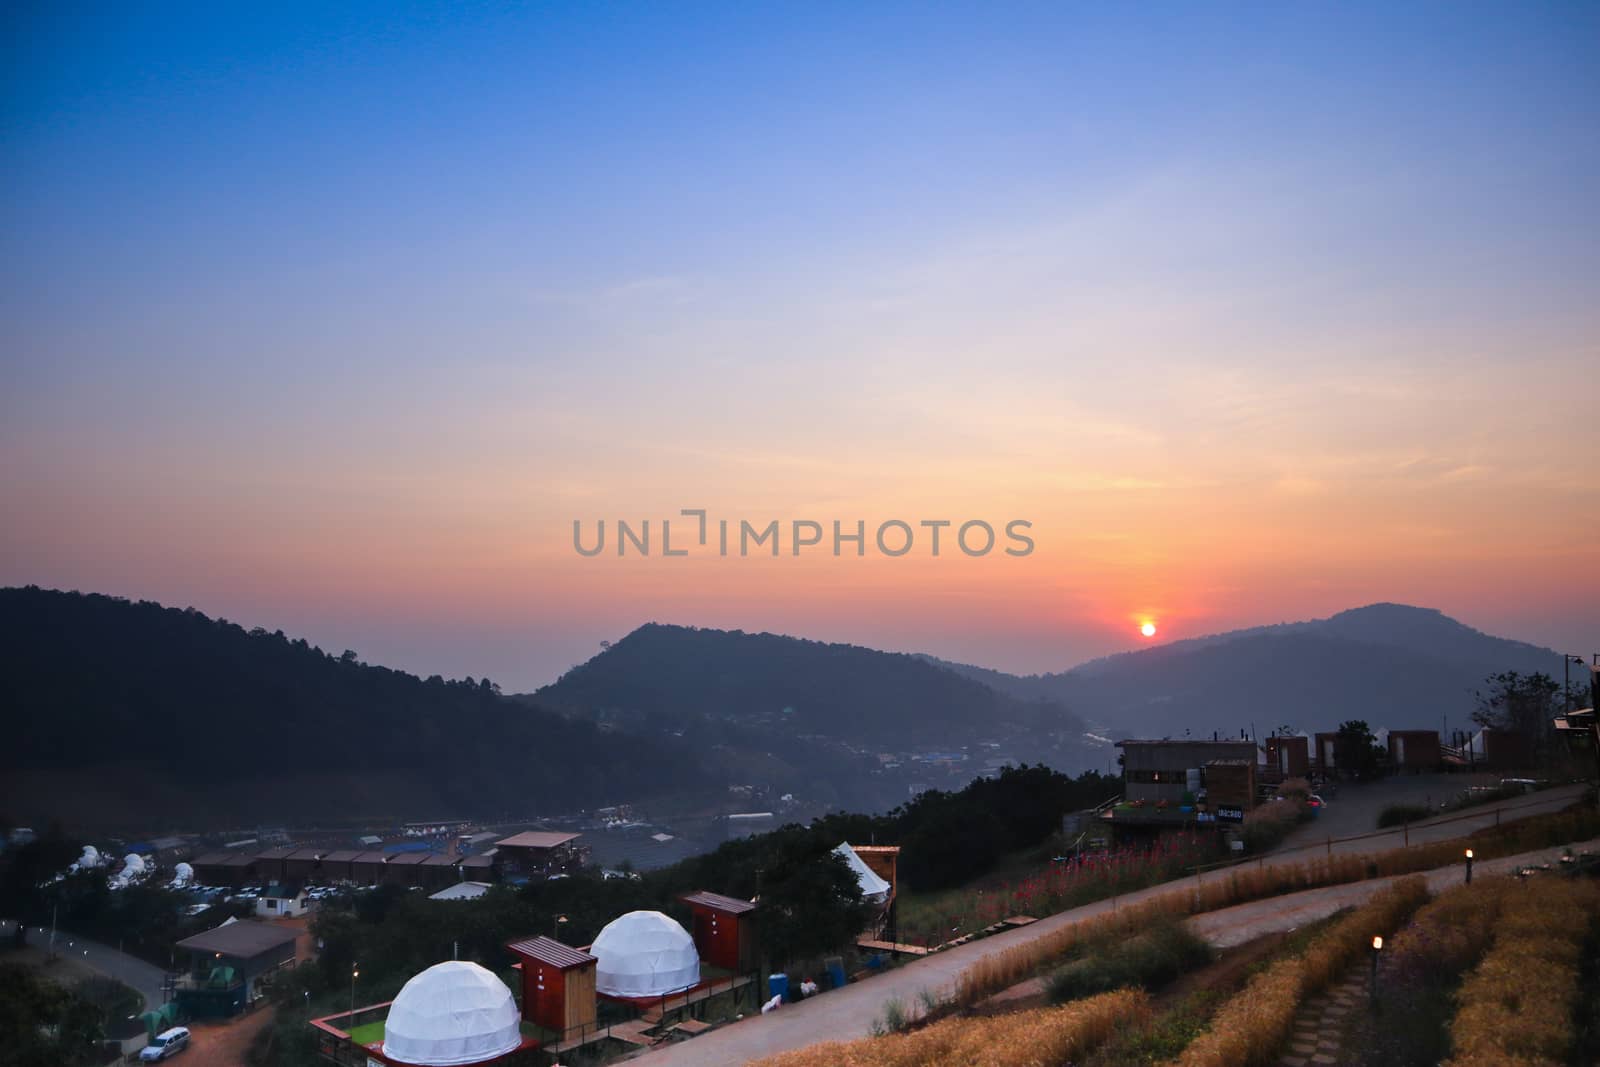 Colorful sunset over the mountain hills in a thai village near mountains in Chiang Mai, Thailand. The mountain scenery view